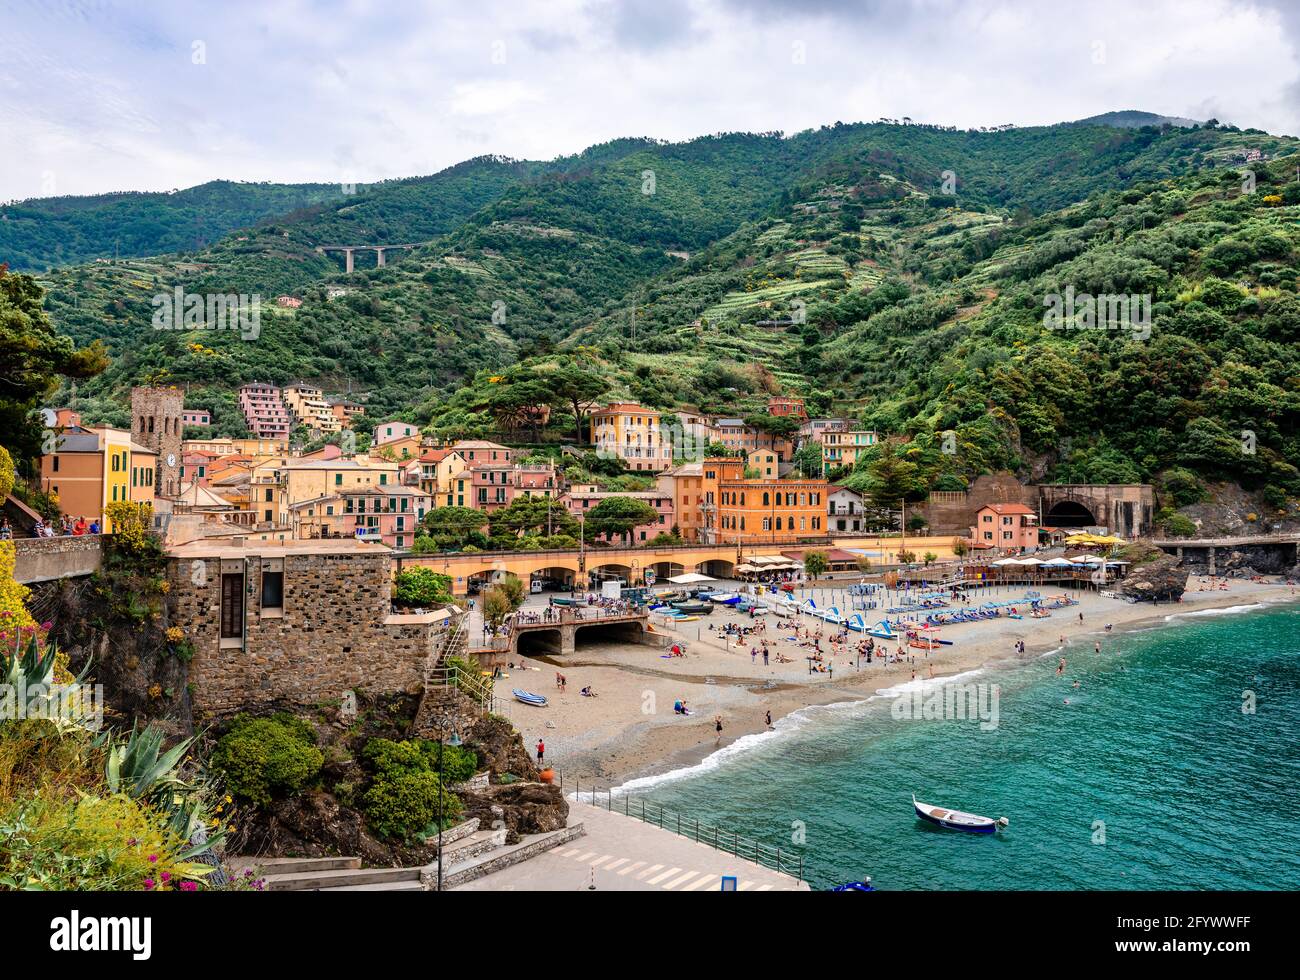 View of Monterosso al Mare and Bar Alga beach. Monterosso is the westernmost of the Cinque Terre, a national park in Liguria, Italy Stock Photo